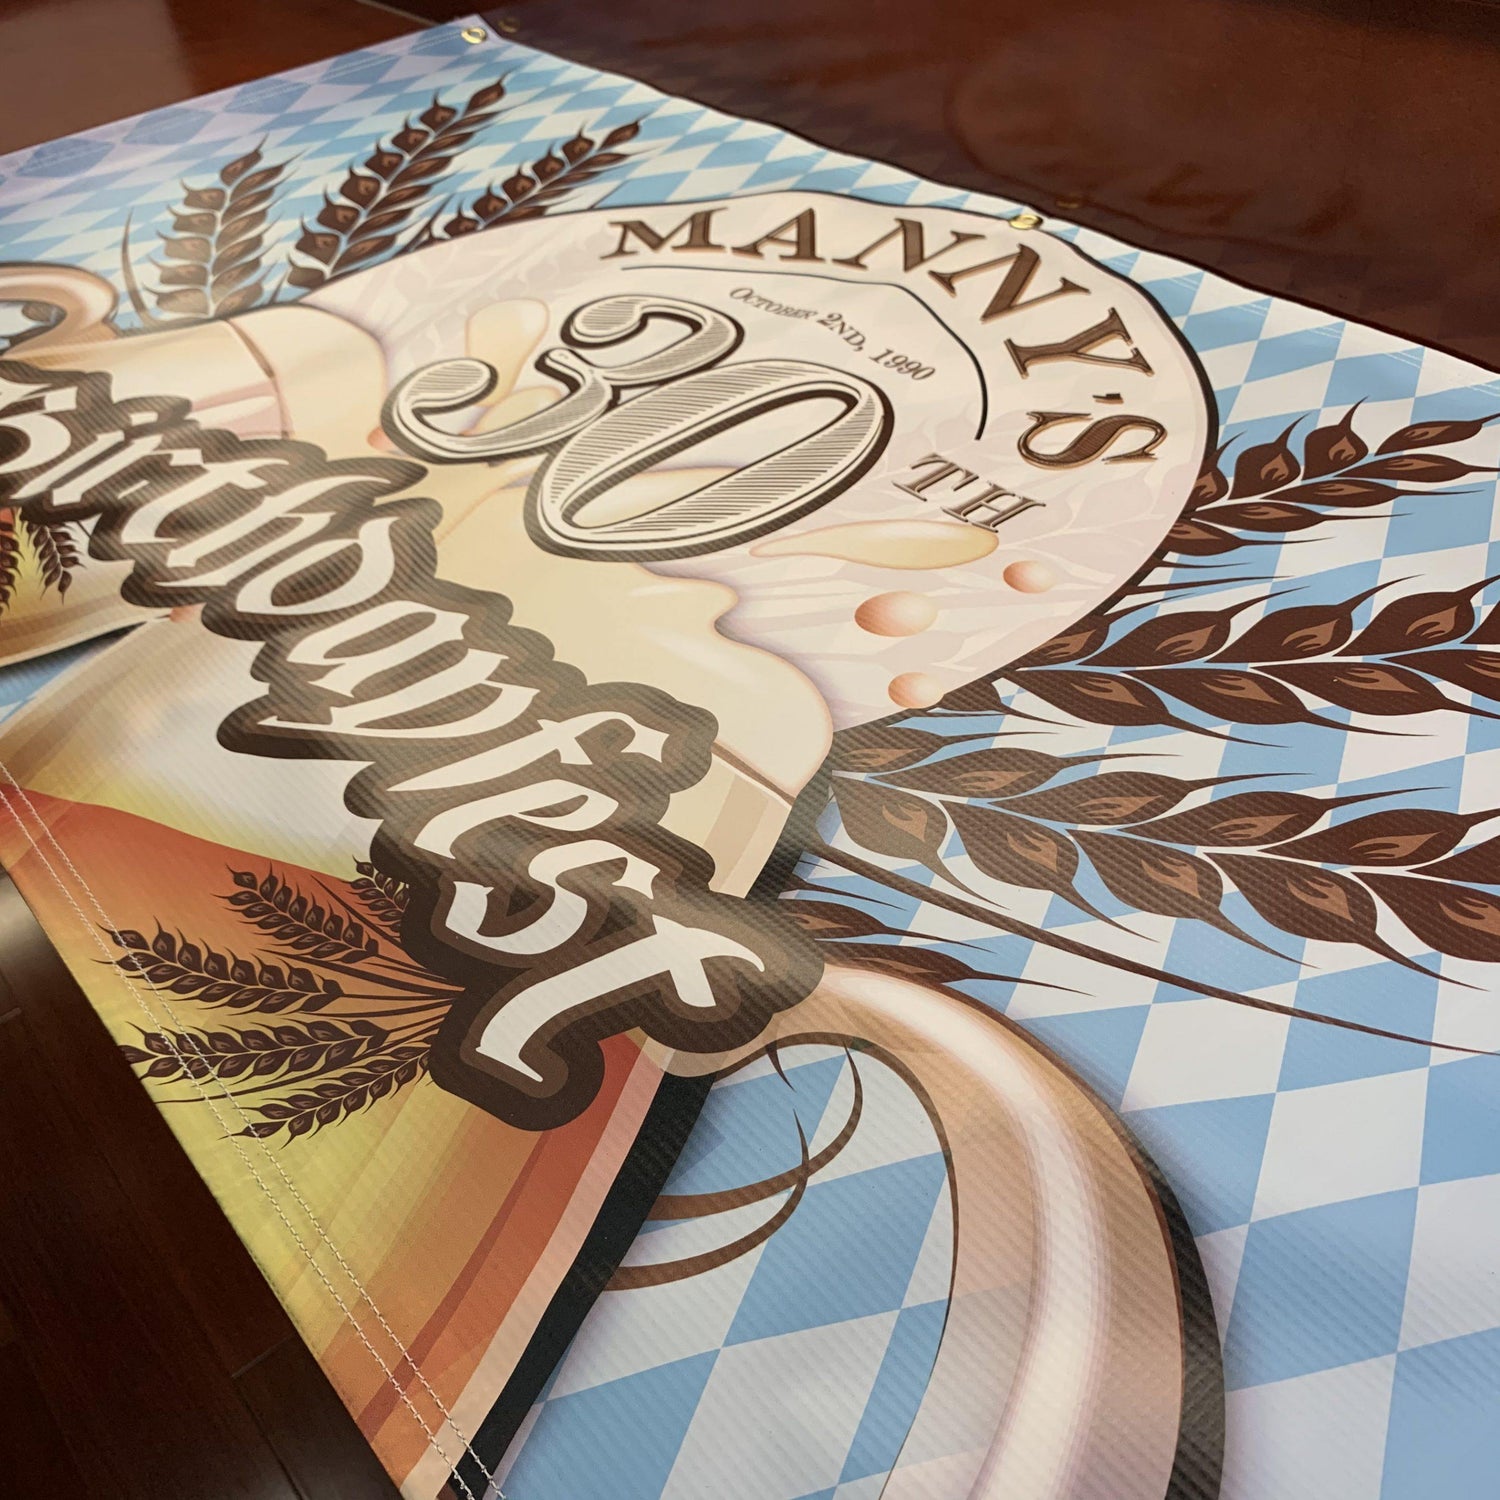 Personalized Oktoberfest Birthday Banner Party Decoration - HomeHaps